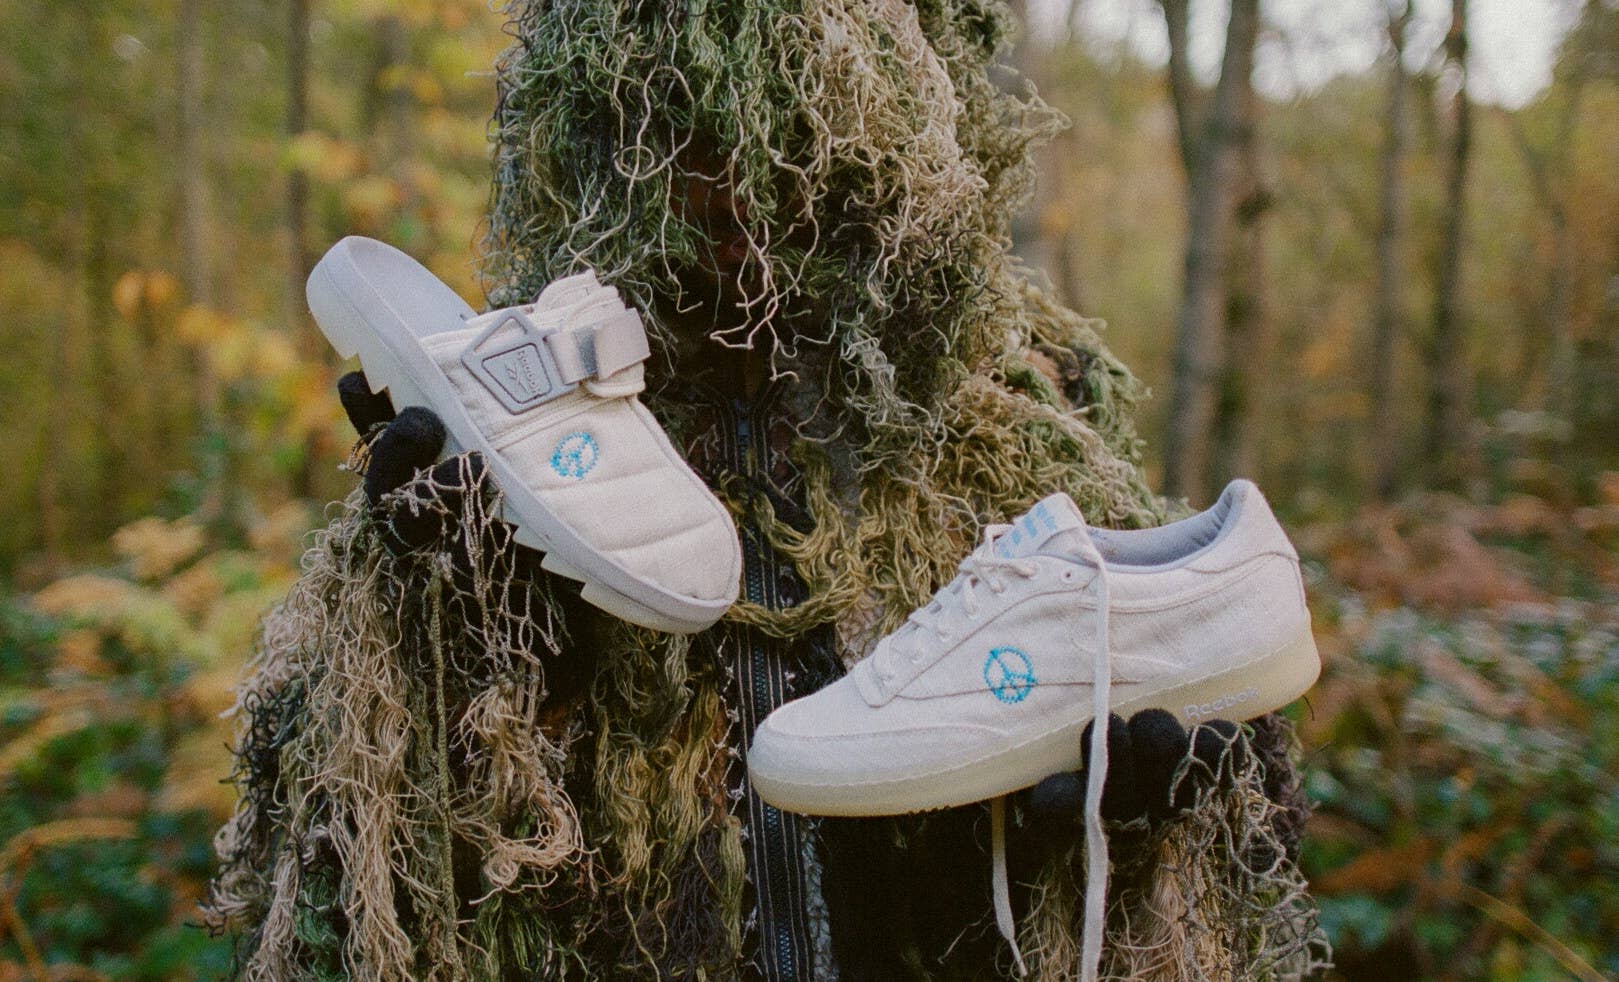 Story Mfg. Reebok Collab Is Inspired by Outdoors | Complex